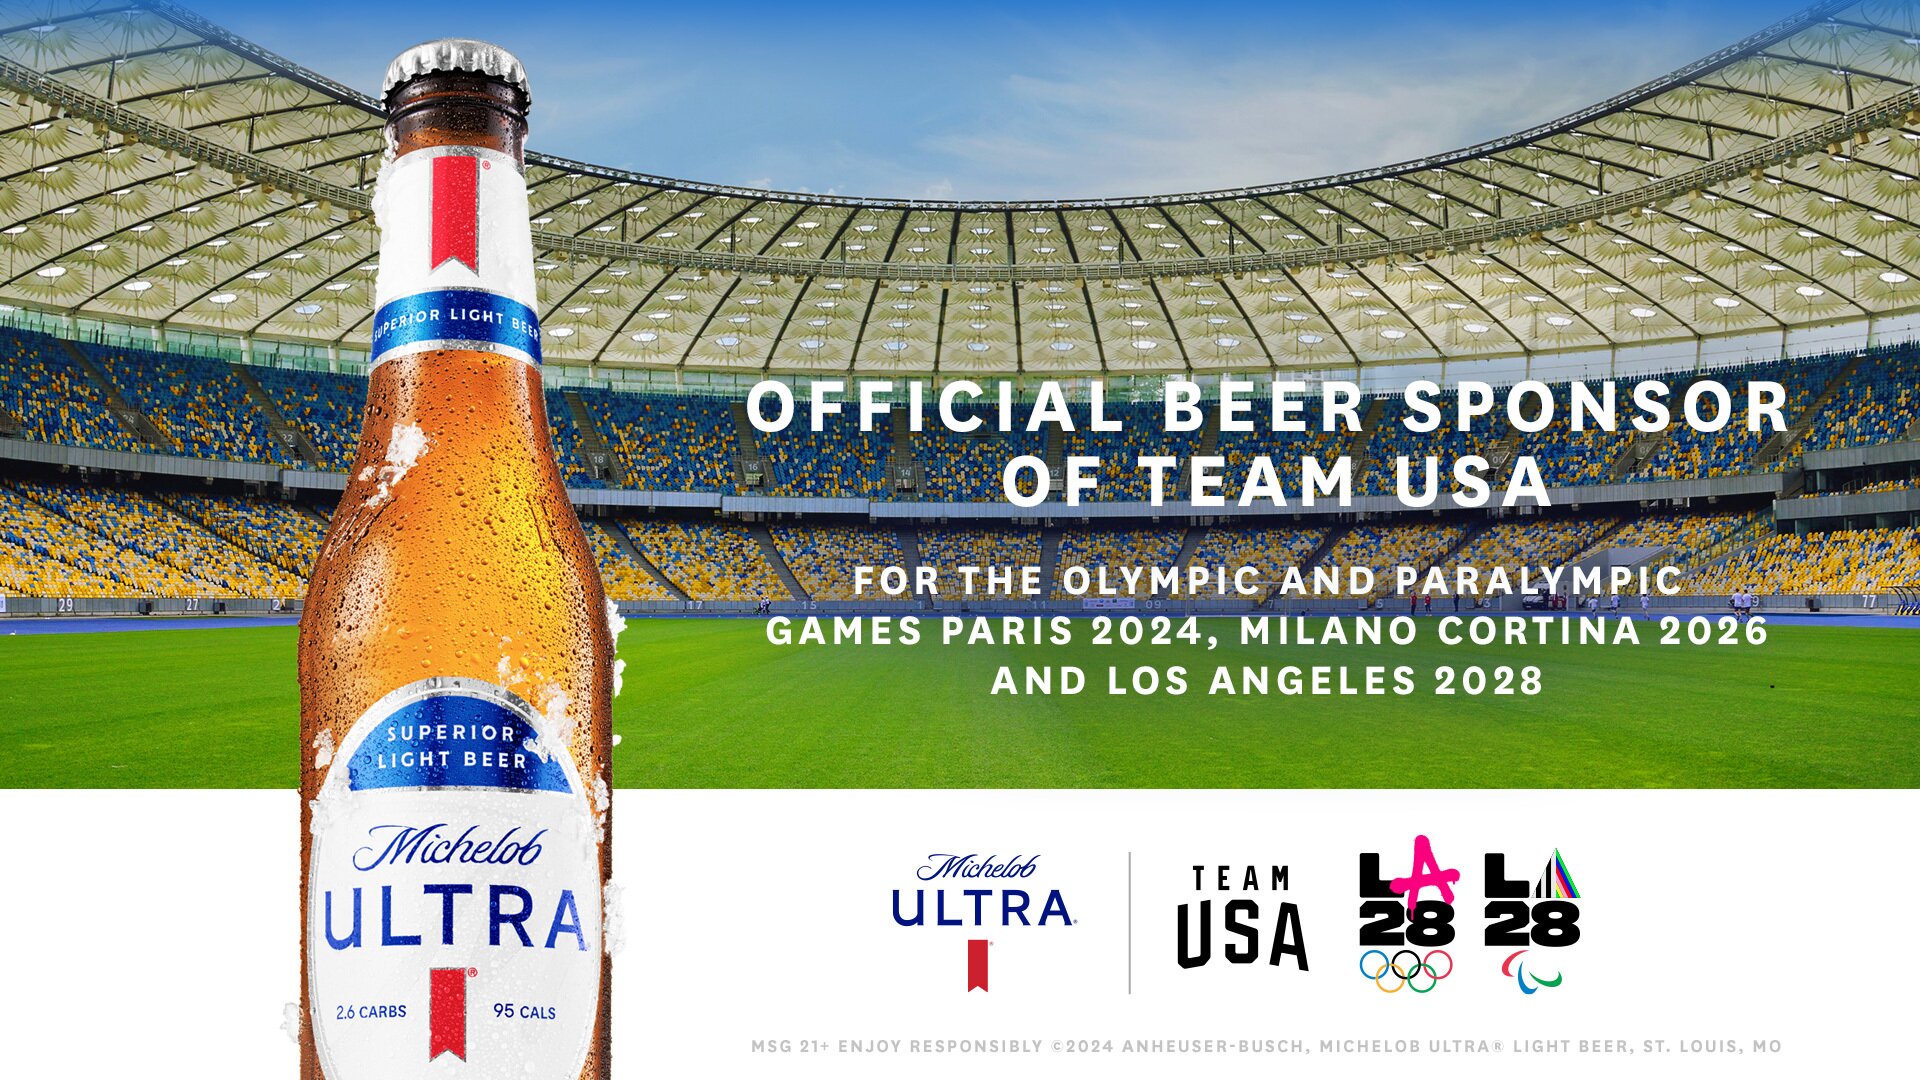 Michelob ULTRA Named Exclusive Beer Sponsor of Team USA at the Olympic and Paralympic Games and Official Beer Sponsor of the LA28 Games